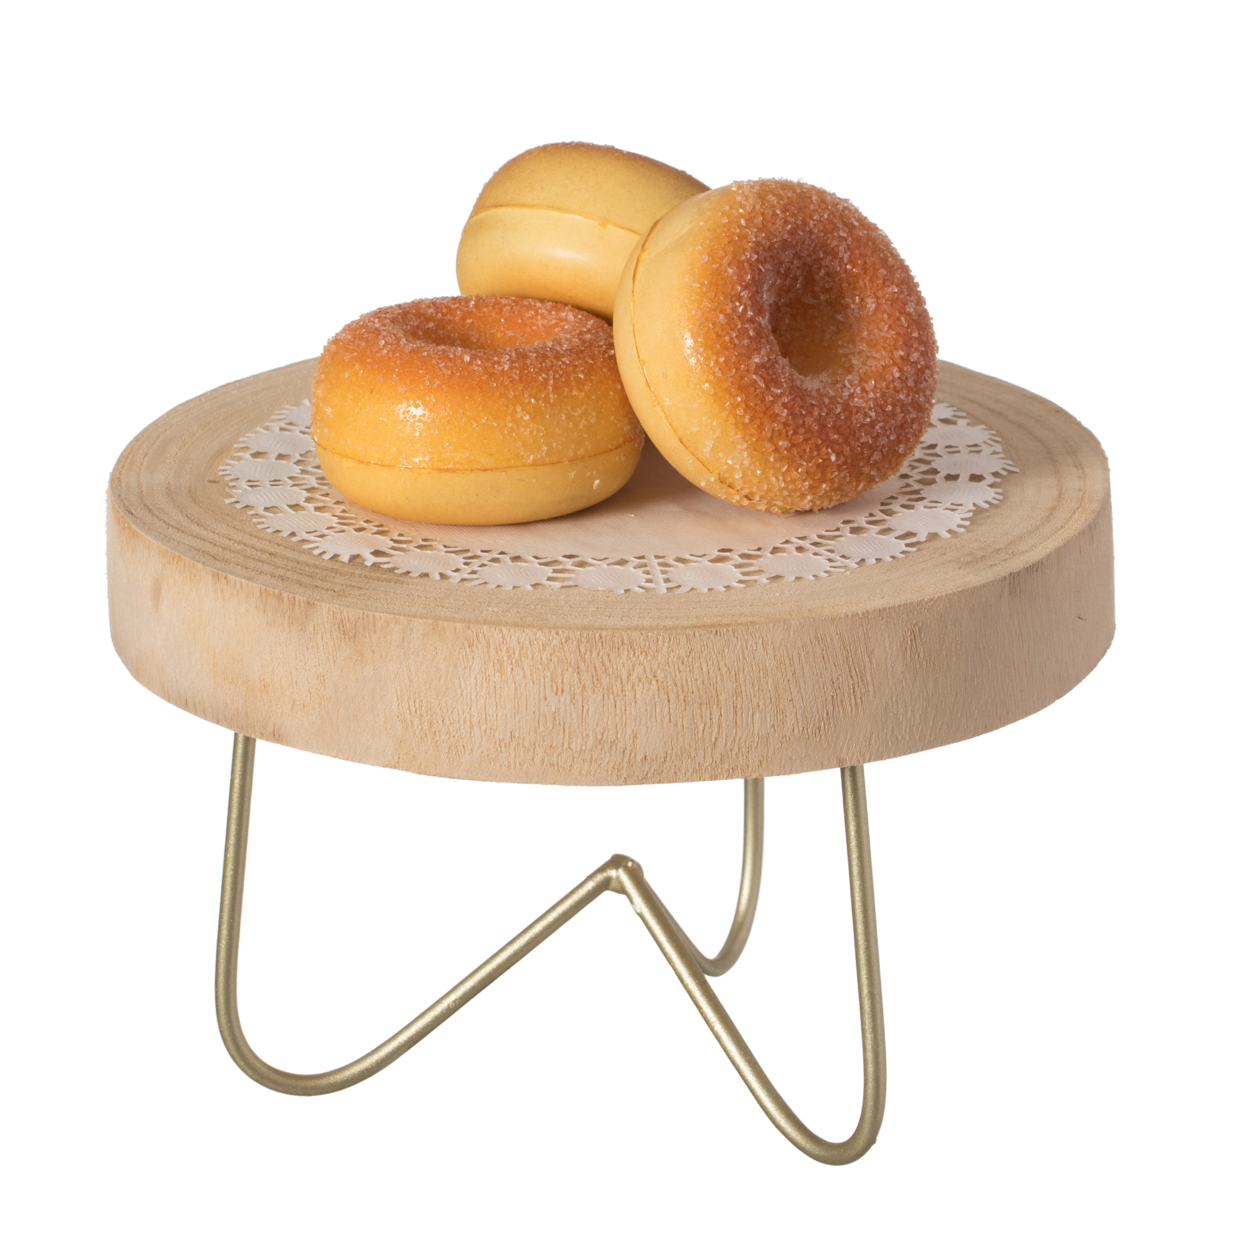 Decorative Natural Round Wood Tree Slice Serving Tray With Gold Metal Stand